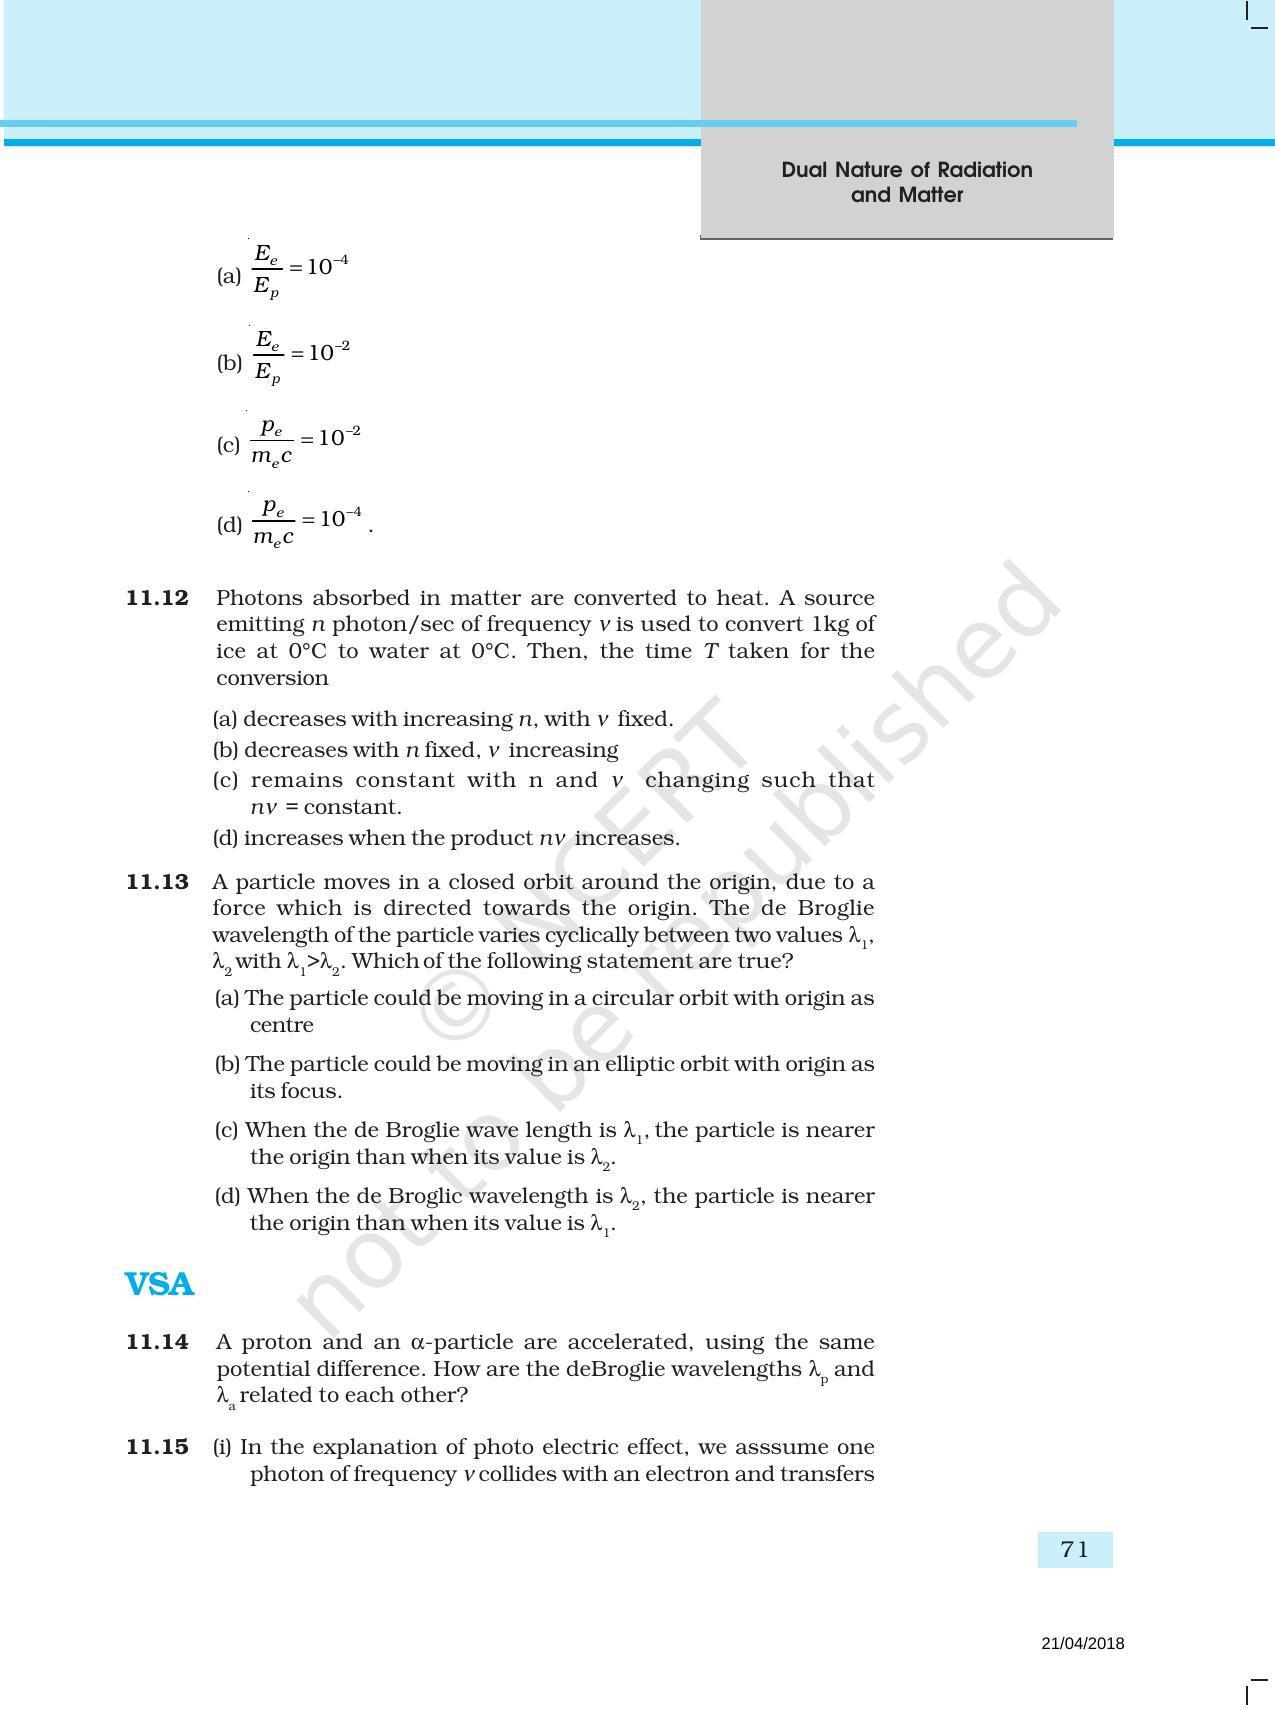 NCERT Exemplar Book for Class 12 Physics: Chapter 11 Dual Nature of Radiation and Matter - Page 4